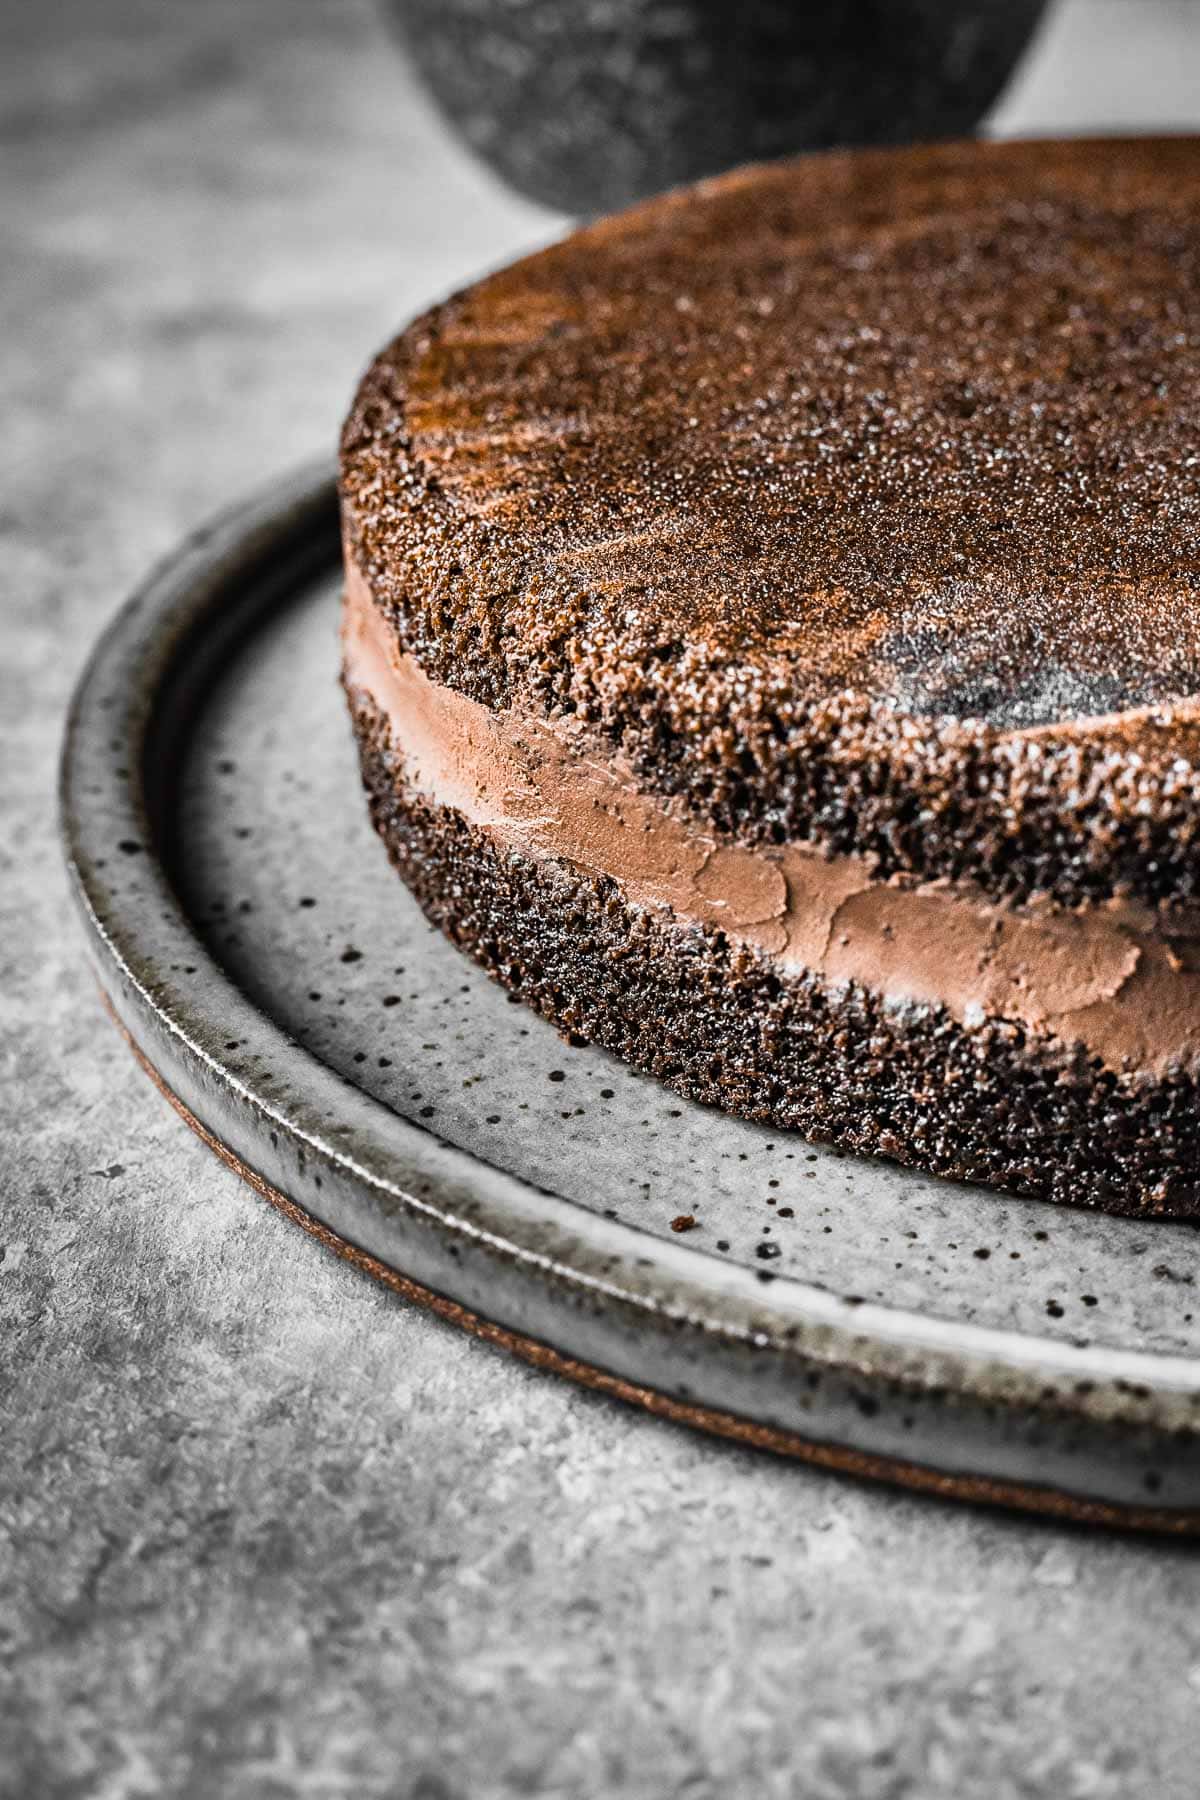 A torted chocolate cake with a middle layer of whipped chocolate ganache filling.